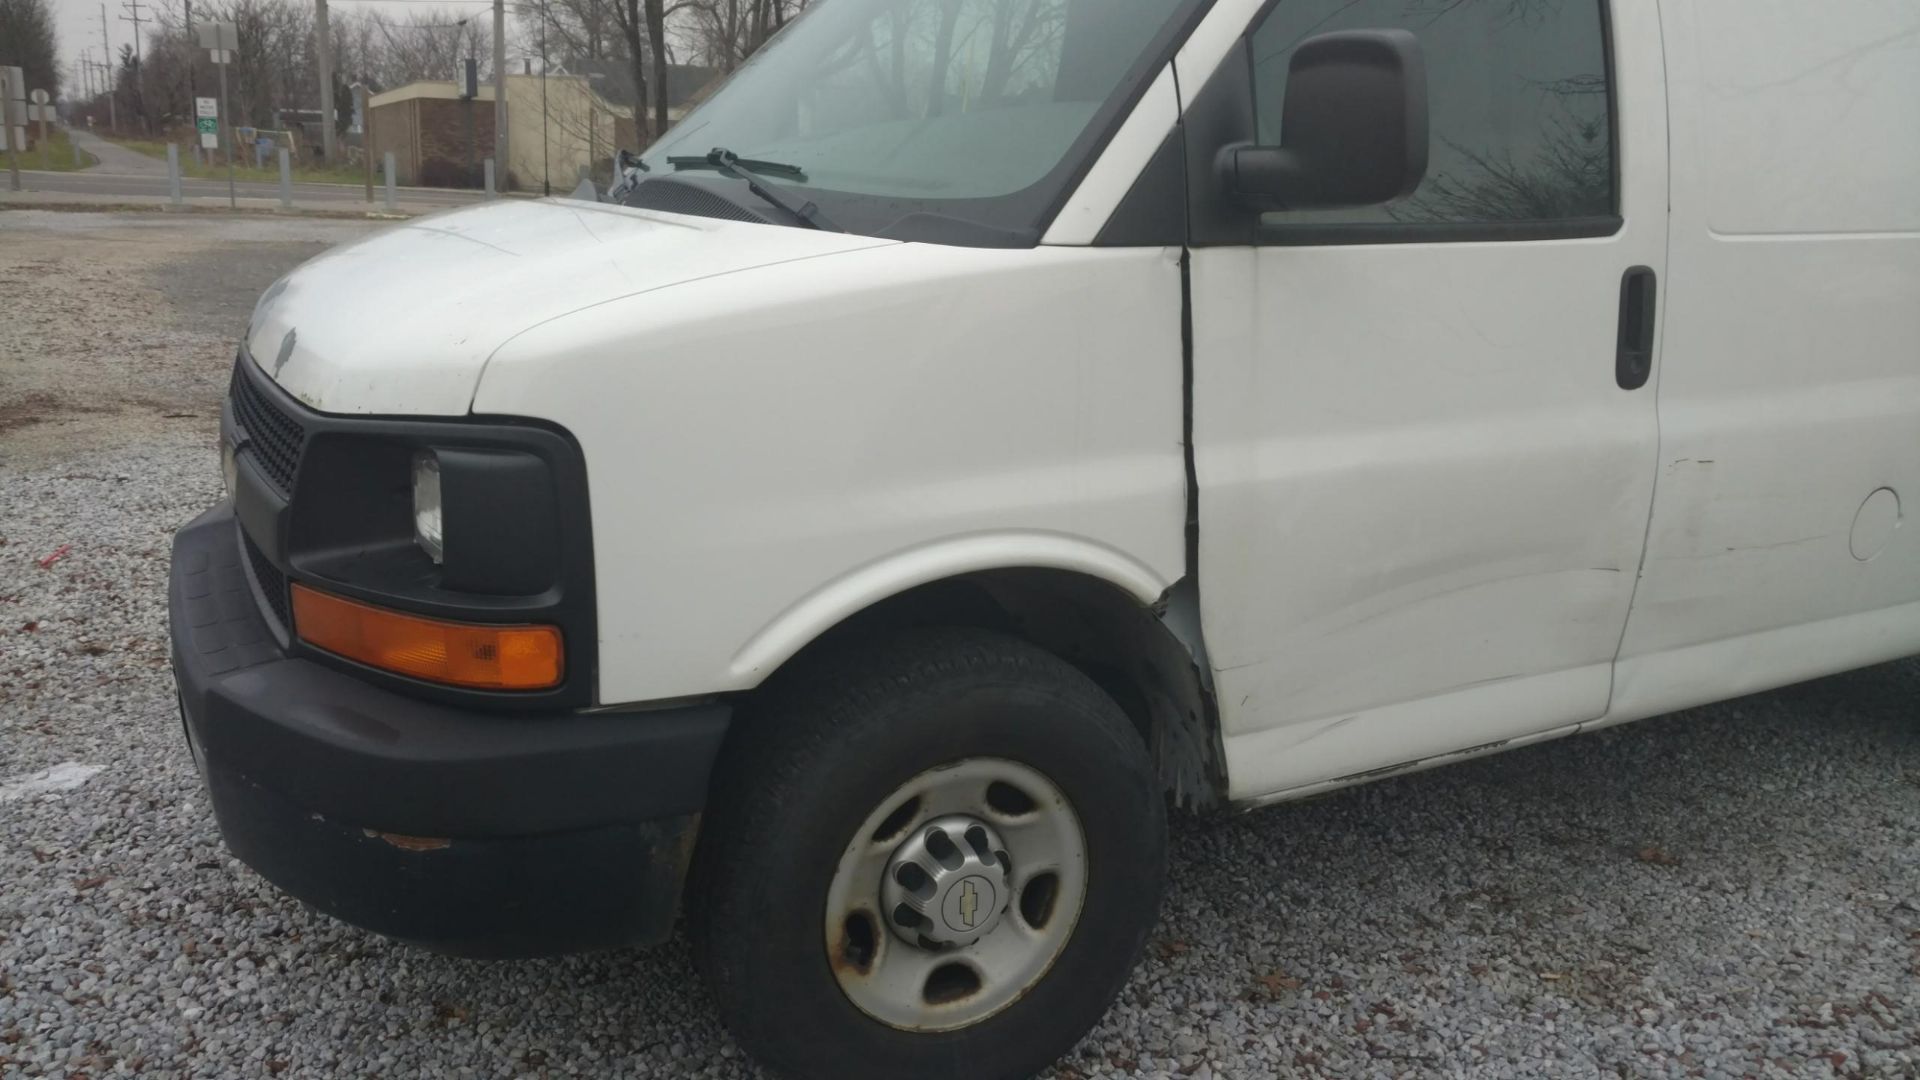 2010 Chevrolet Express Automatic, Air Conditioning, G2500, VIN: 1GCZGFDA1A1148324, 162,892 Miles - Image 2 of 10